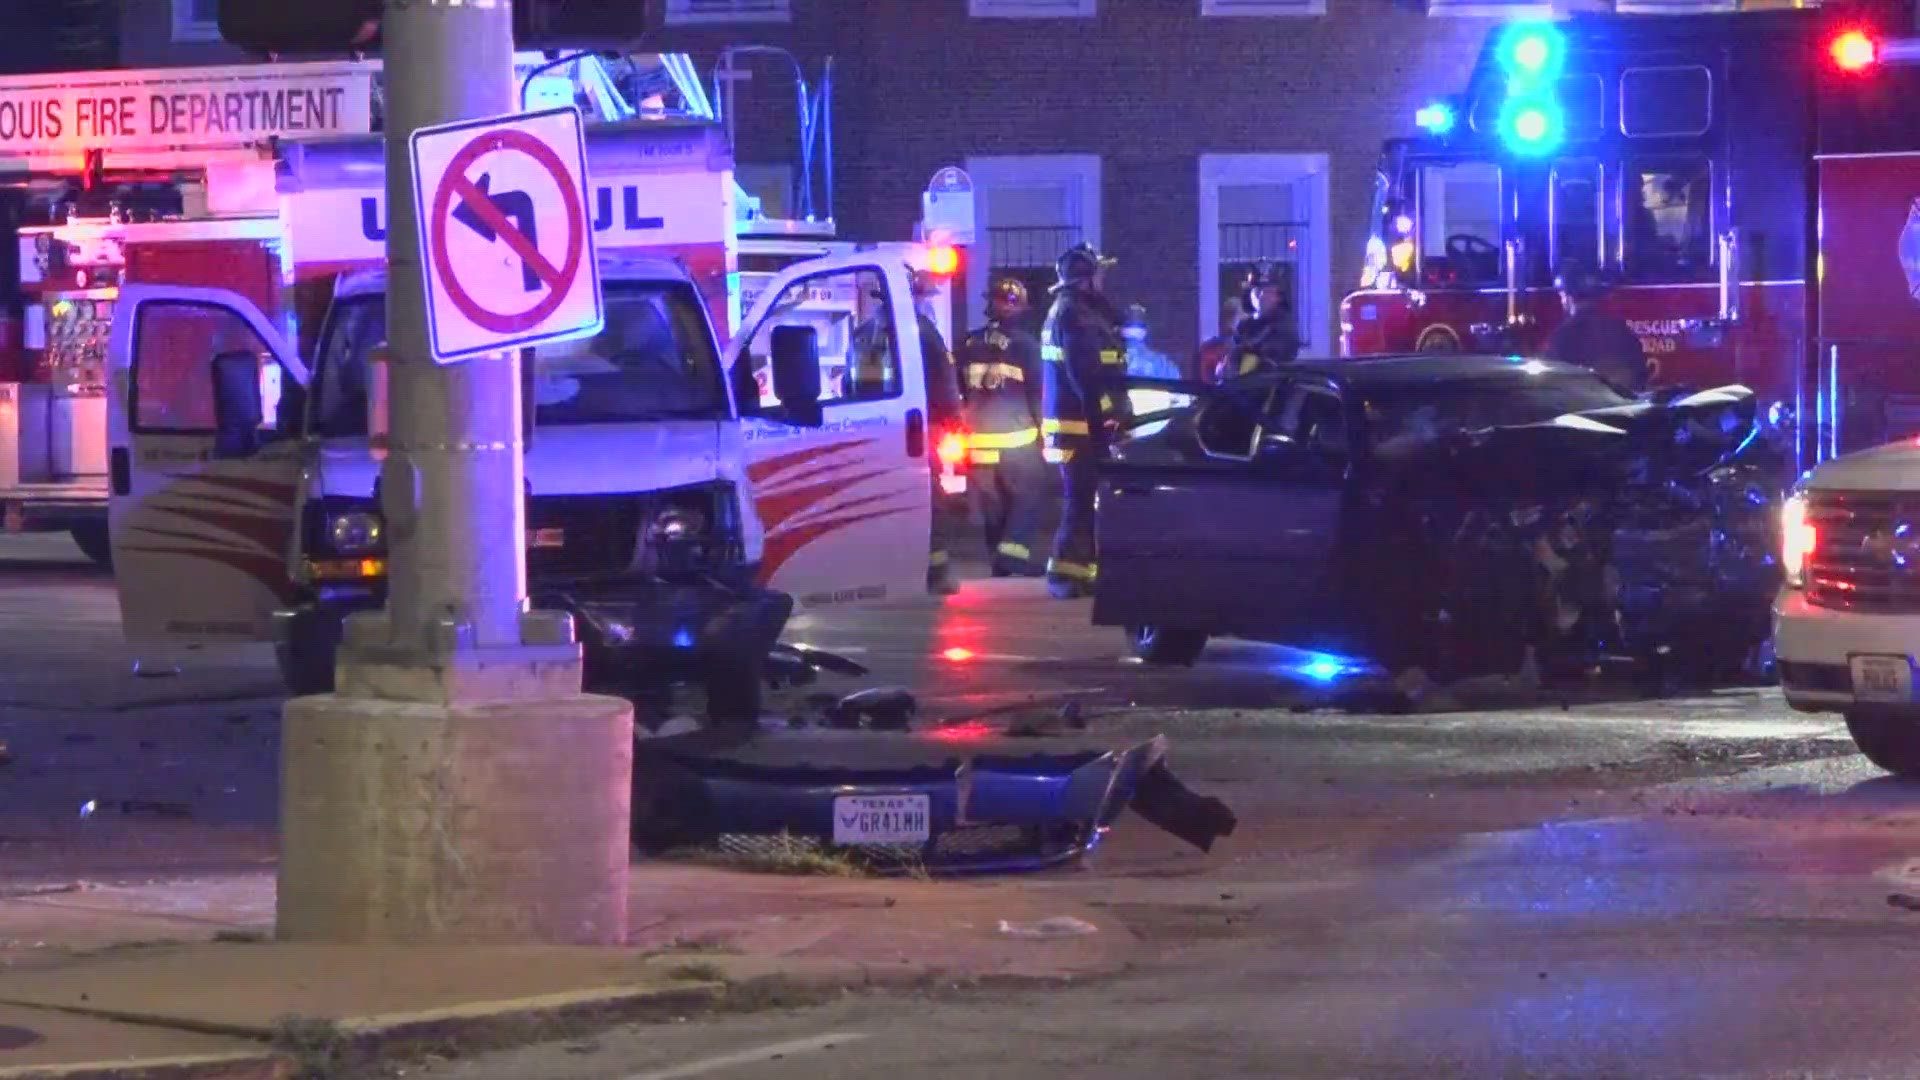 The crash happened just before 2 a.m. at West Florissant Avenue and Riverview Boulevard. One person was killed as a result.